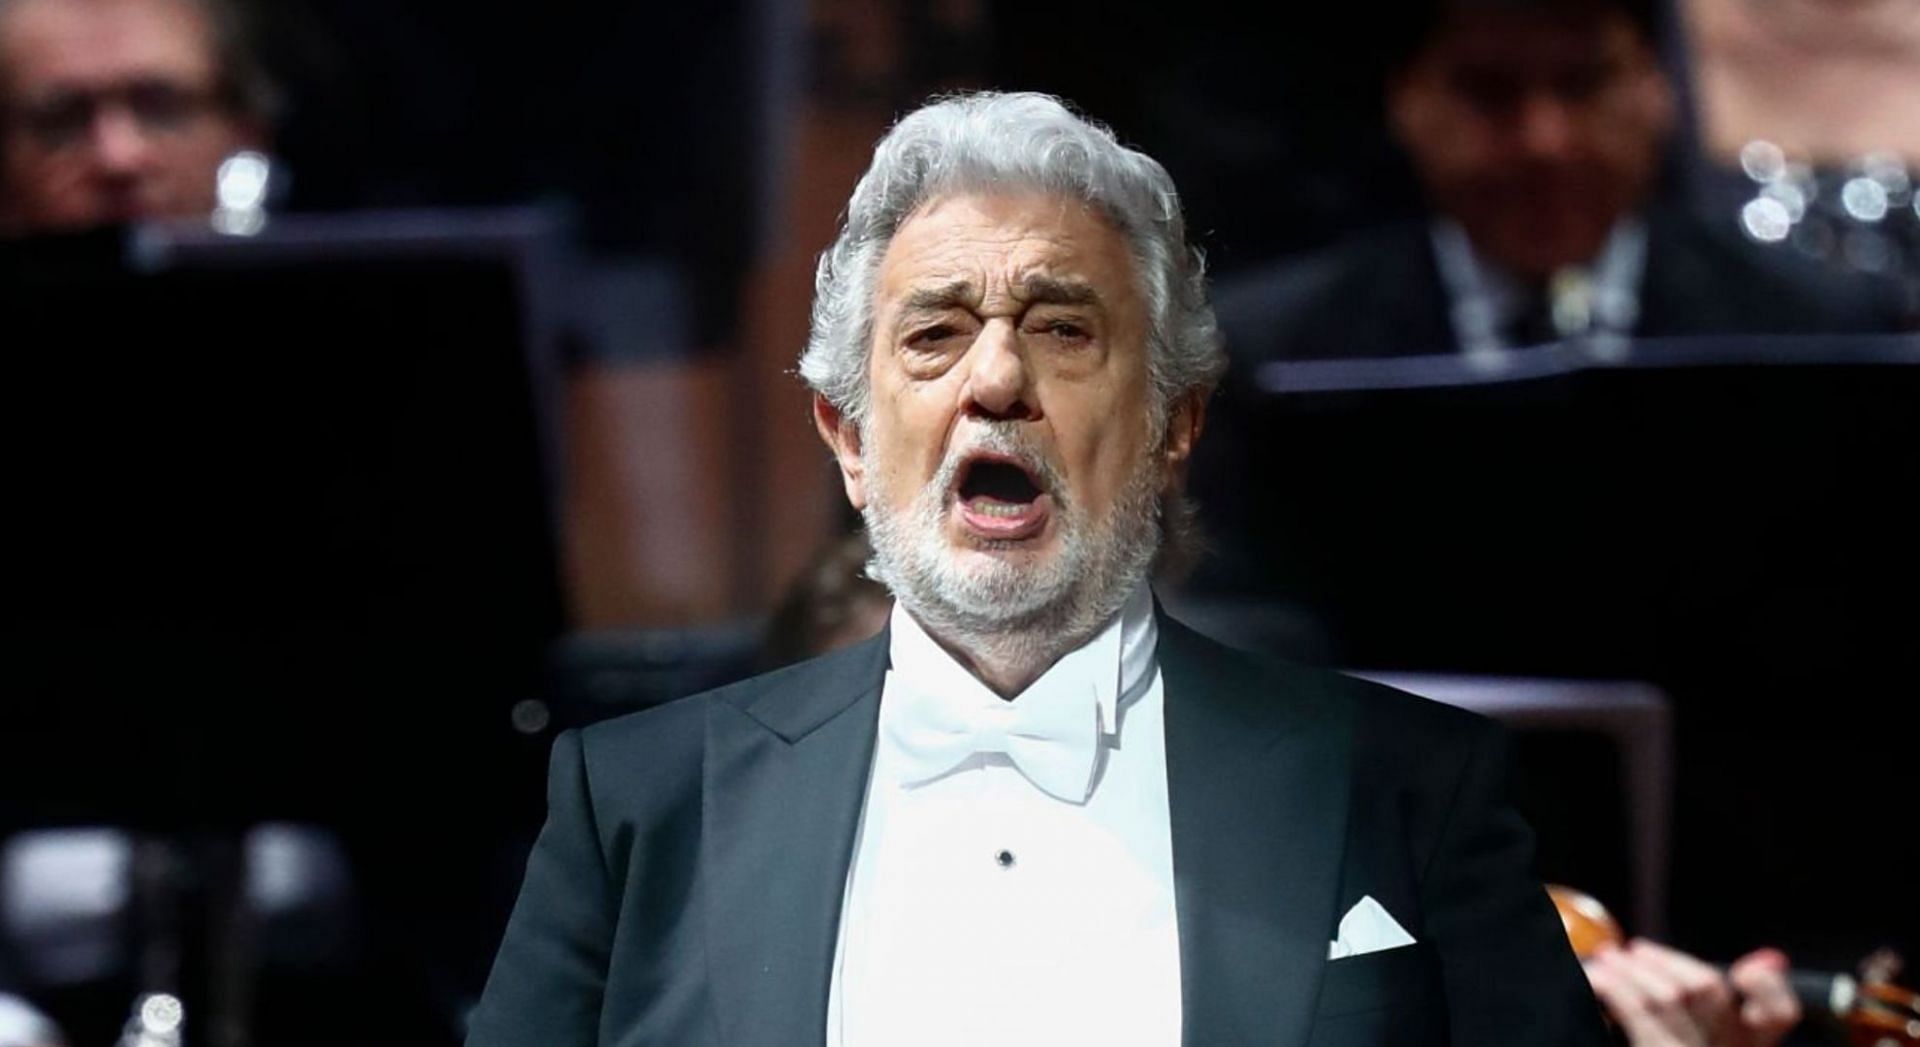 Spanish Opera singer Placido Domingo has faced allegations of being involved in a Buenos Aires trafficking ring (Image via Getty Images)